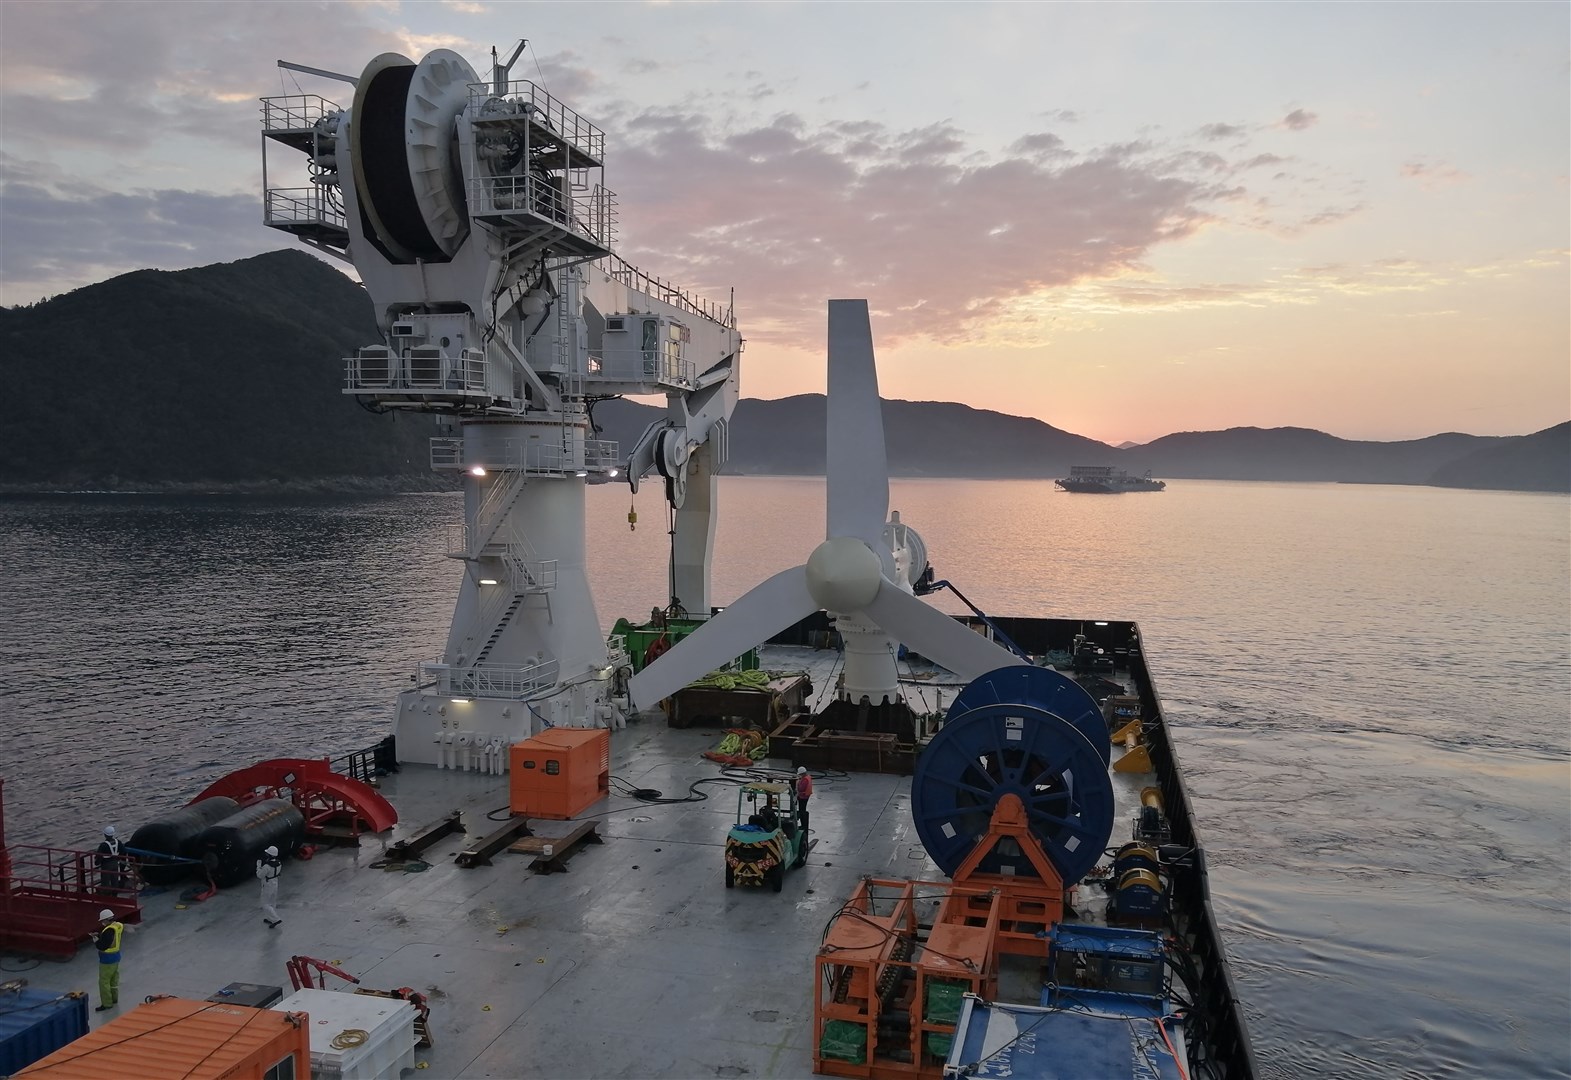 The AR500 turbine is now helping Japan produce clean electricity from tidal power,